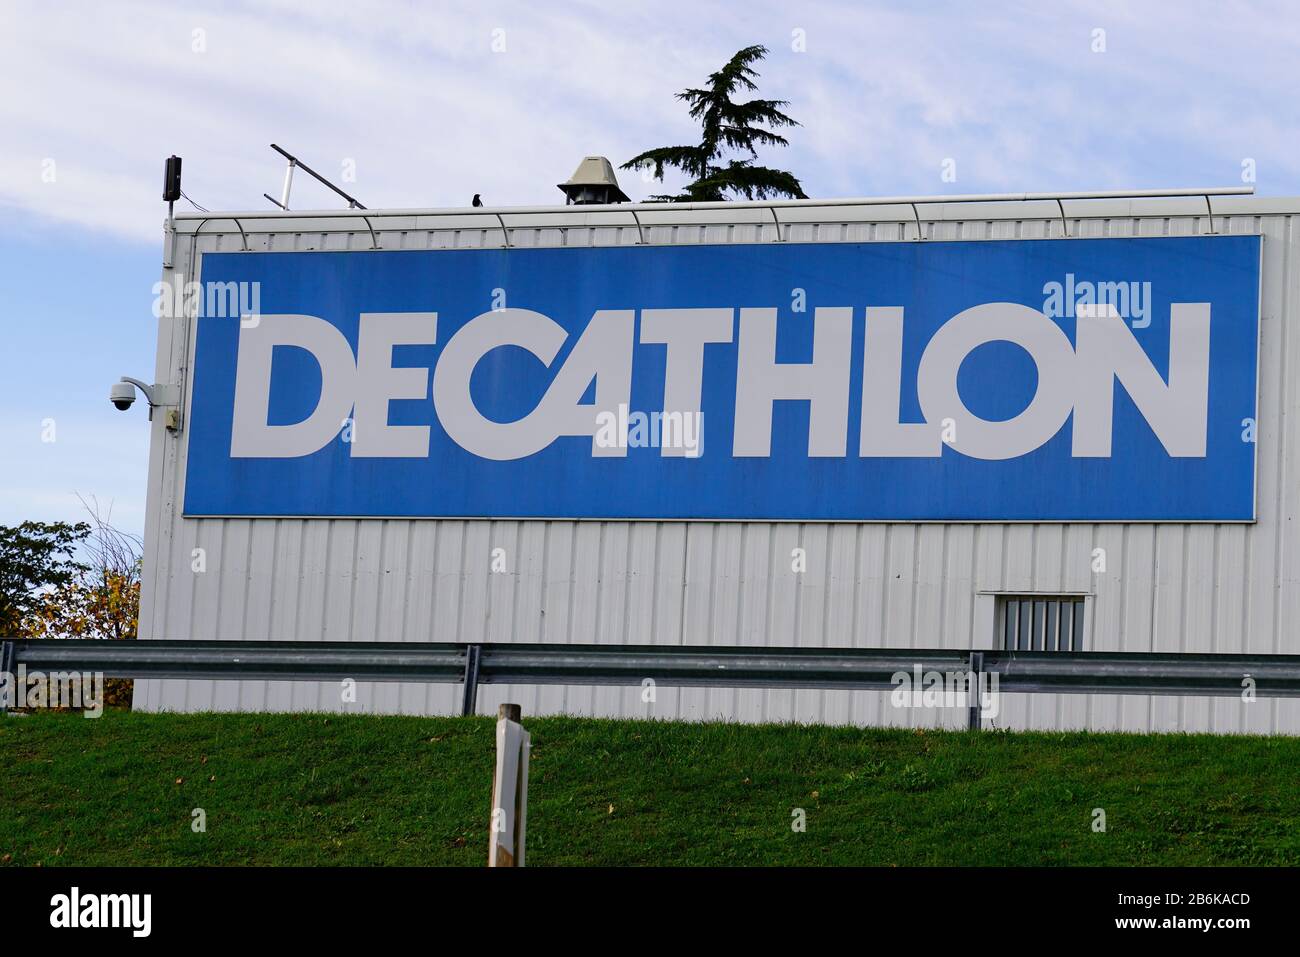 Bordeaux , Aquitaine / France - 10 30 2019 : Decathlon sign logo store French shop sporting goods retailer brand Stock Photo